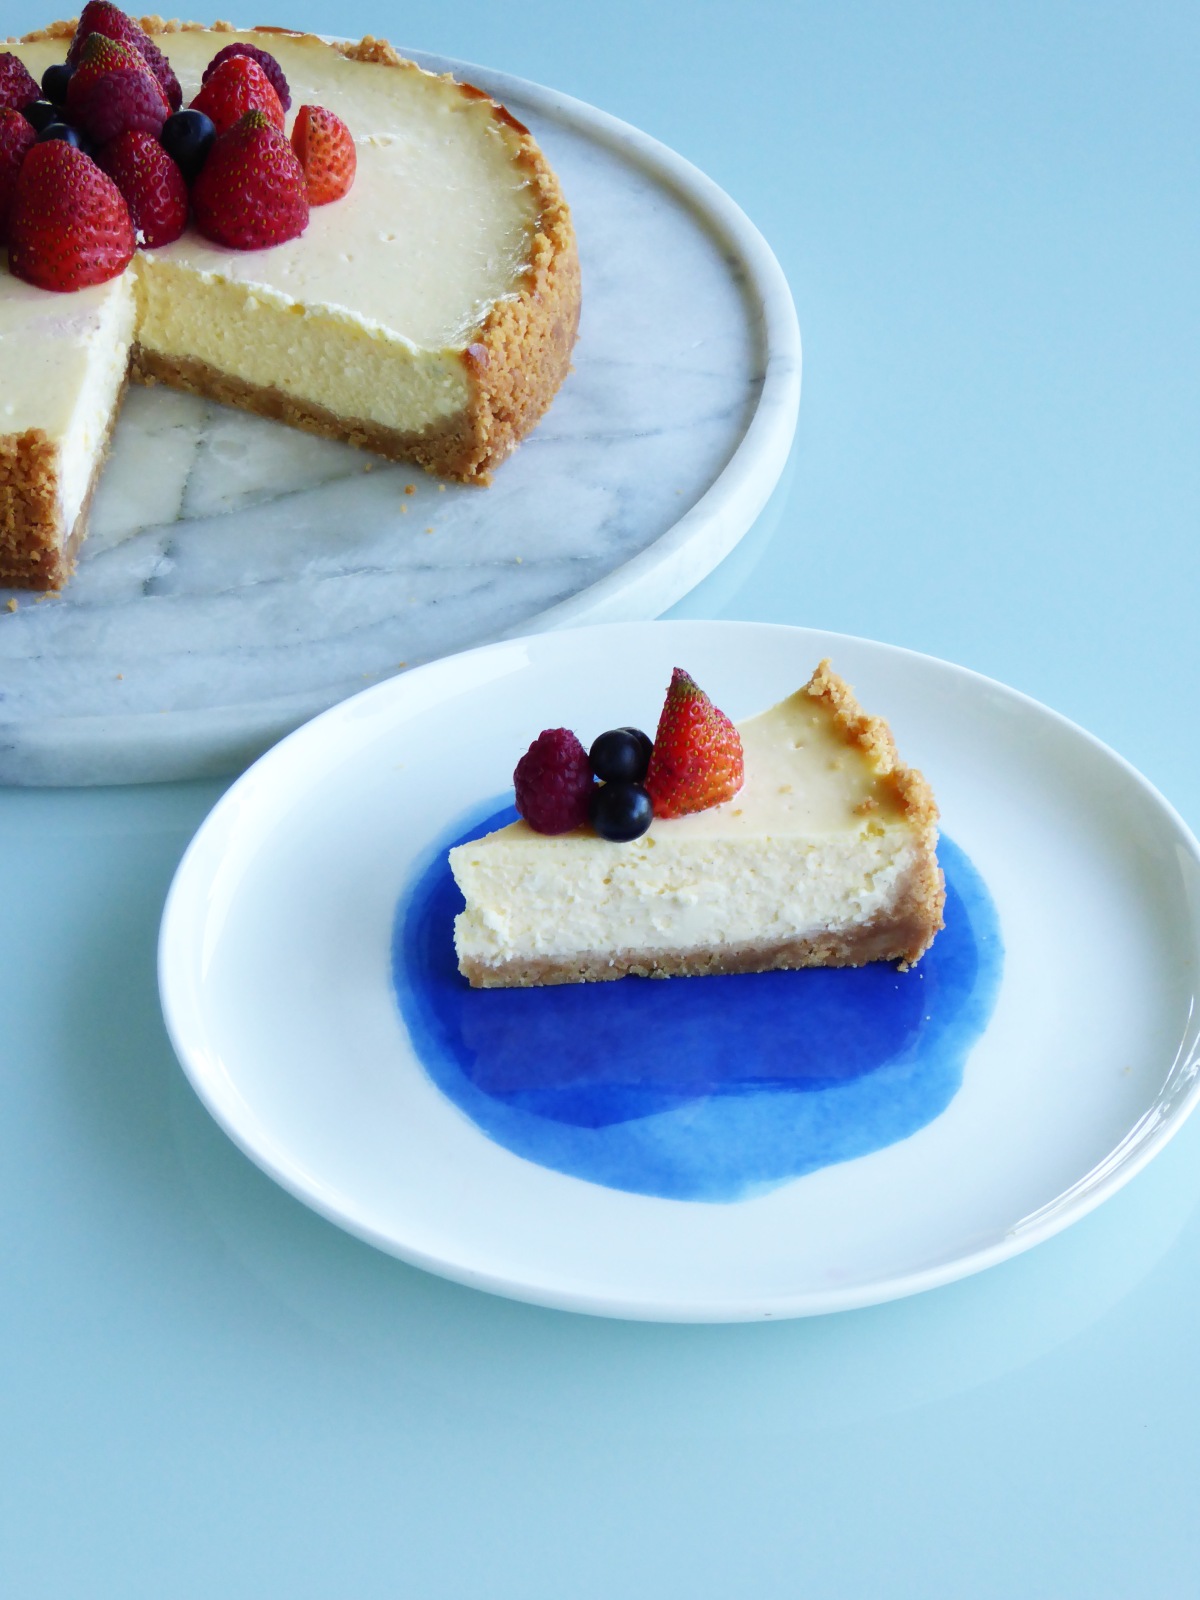 Baked cheesecake 6